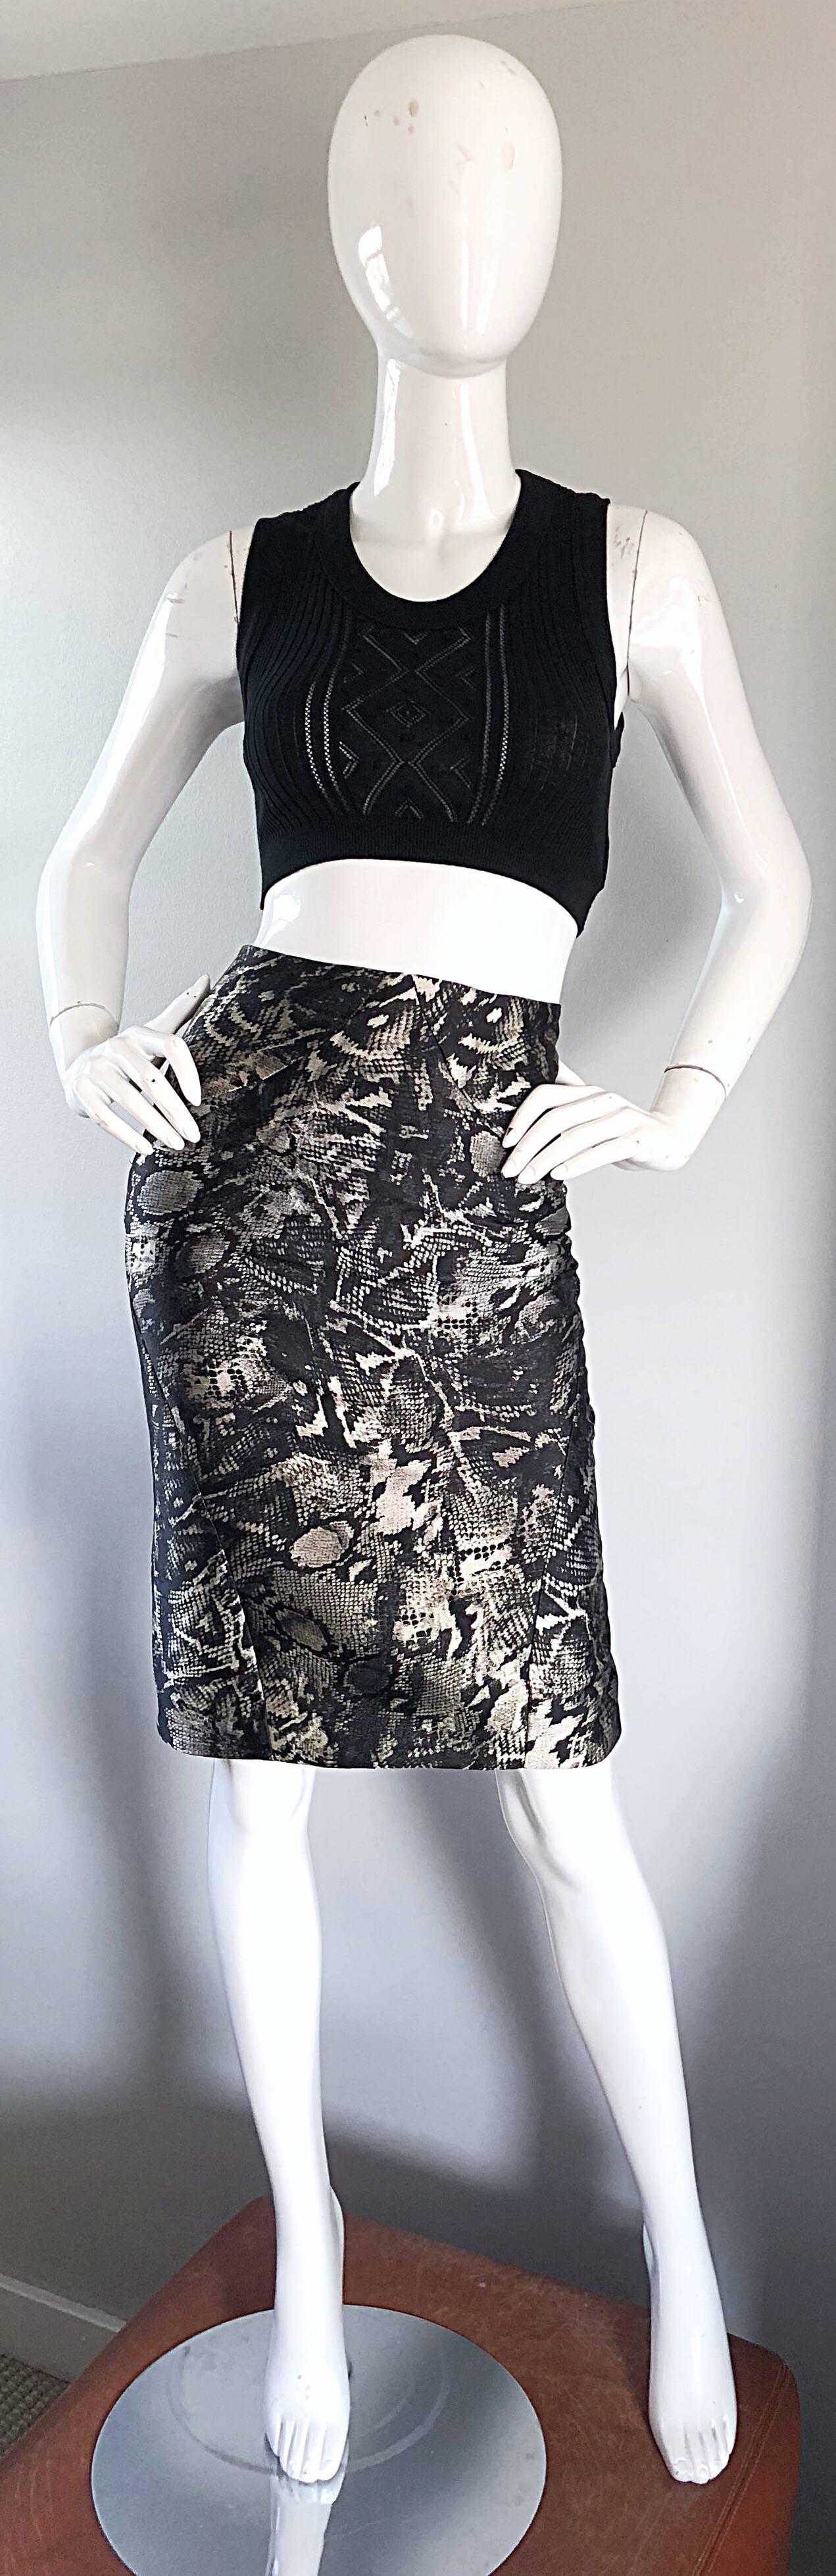 Sexy and chic brand new early 2000s ZAC POSEN $1,275 skirt! Features a flattering high waisted pencil fit, with a flounce hem in the back. Classic, yet edgy abstract snake skin print in silver, black and white. Flattering high waisted fit. Fitted